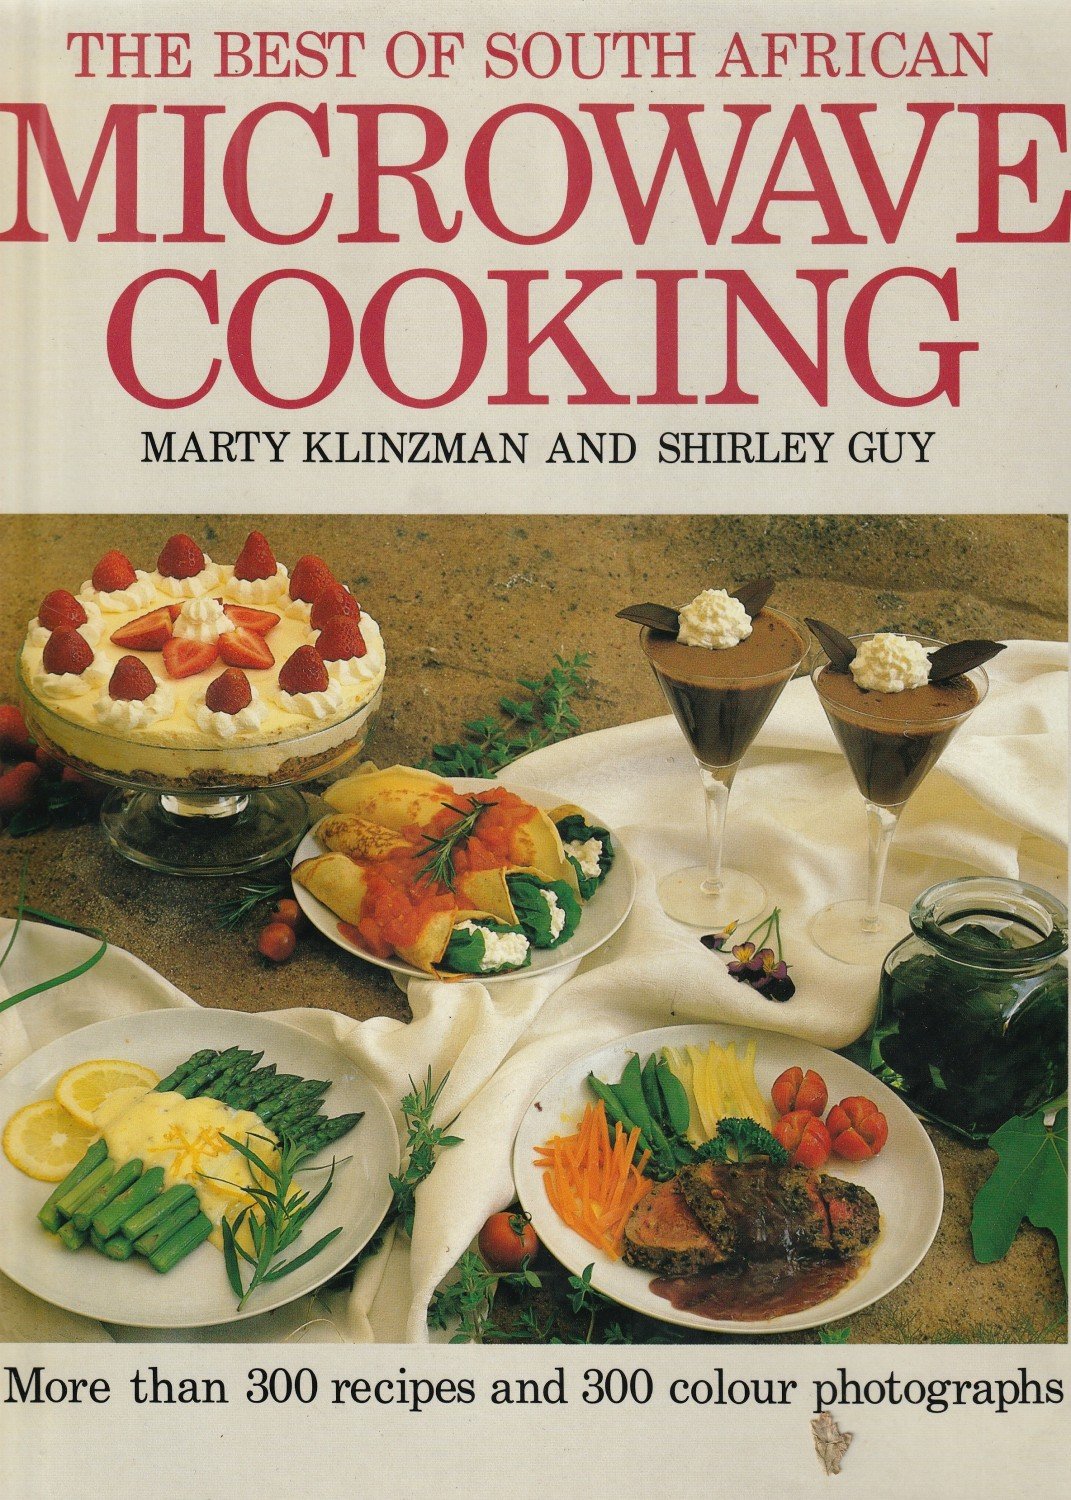 The best of South African Microwave Cooking. Photography by Peter Brooks. [More than 300 recipes and 300 colour photographs].  First publishing. - Klinzman, Marty / Guy, Shirley